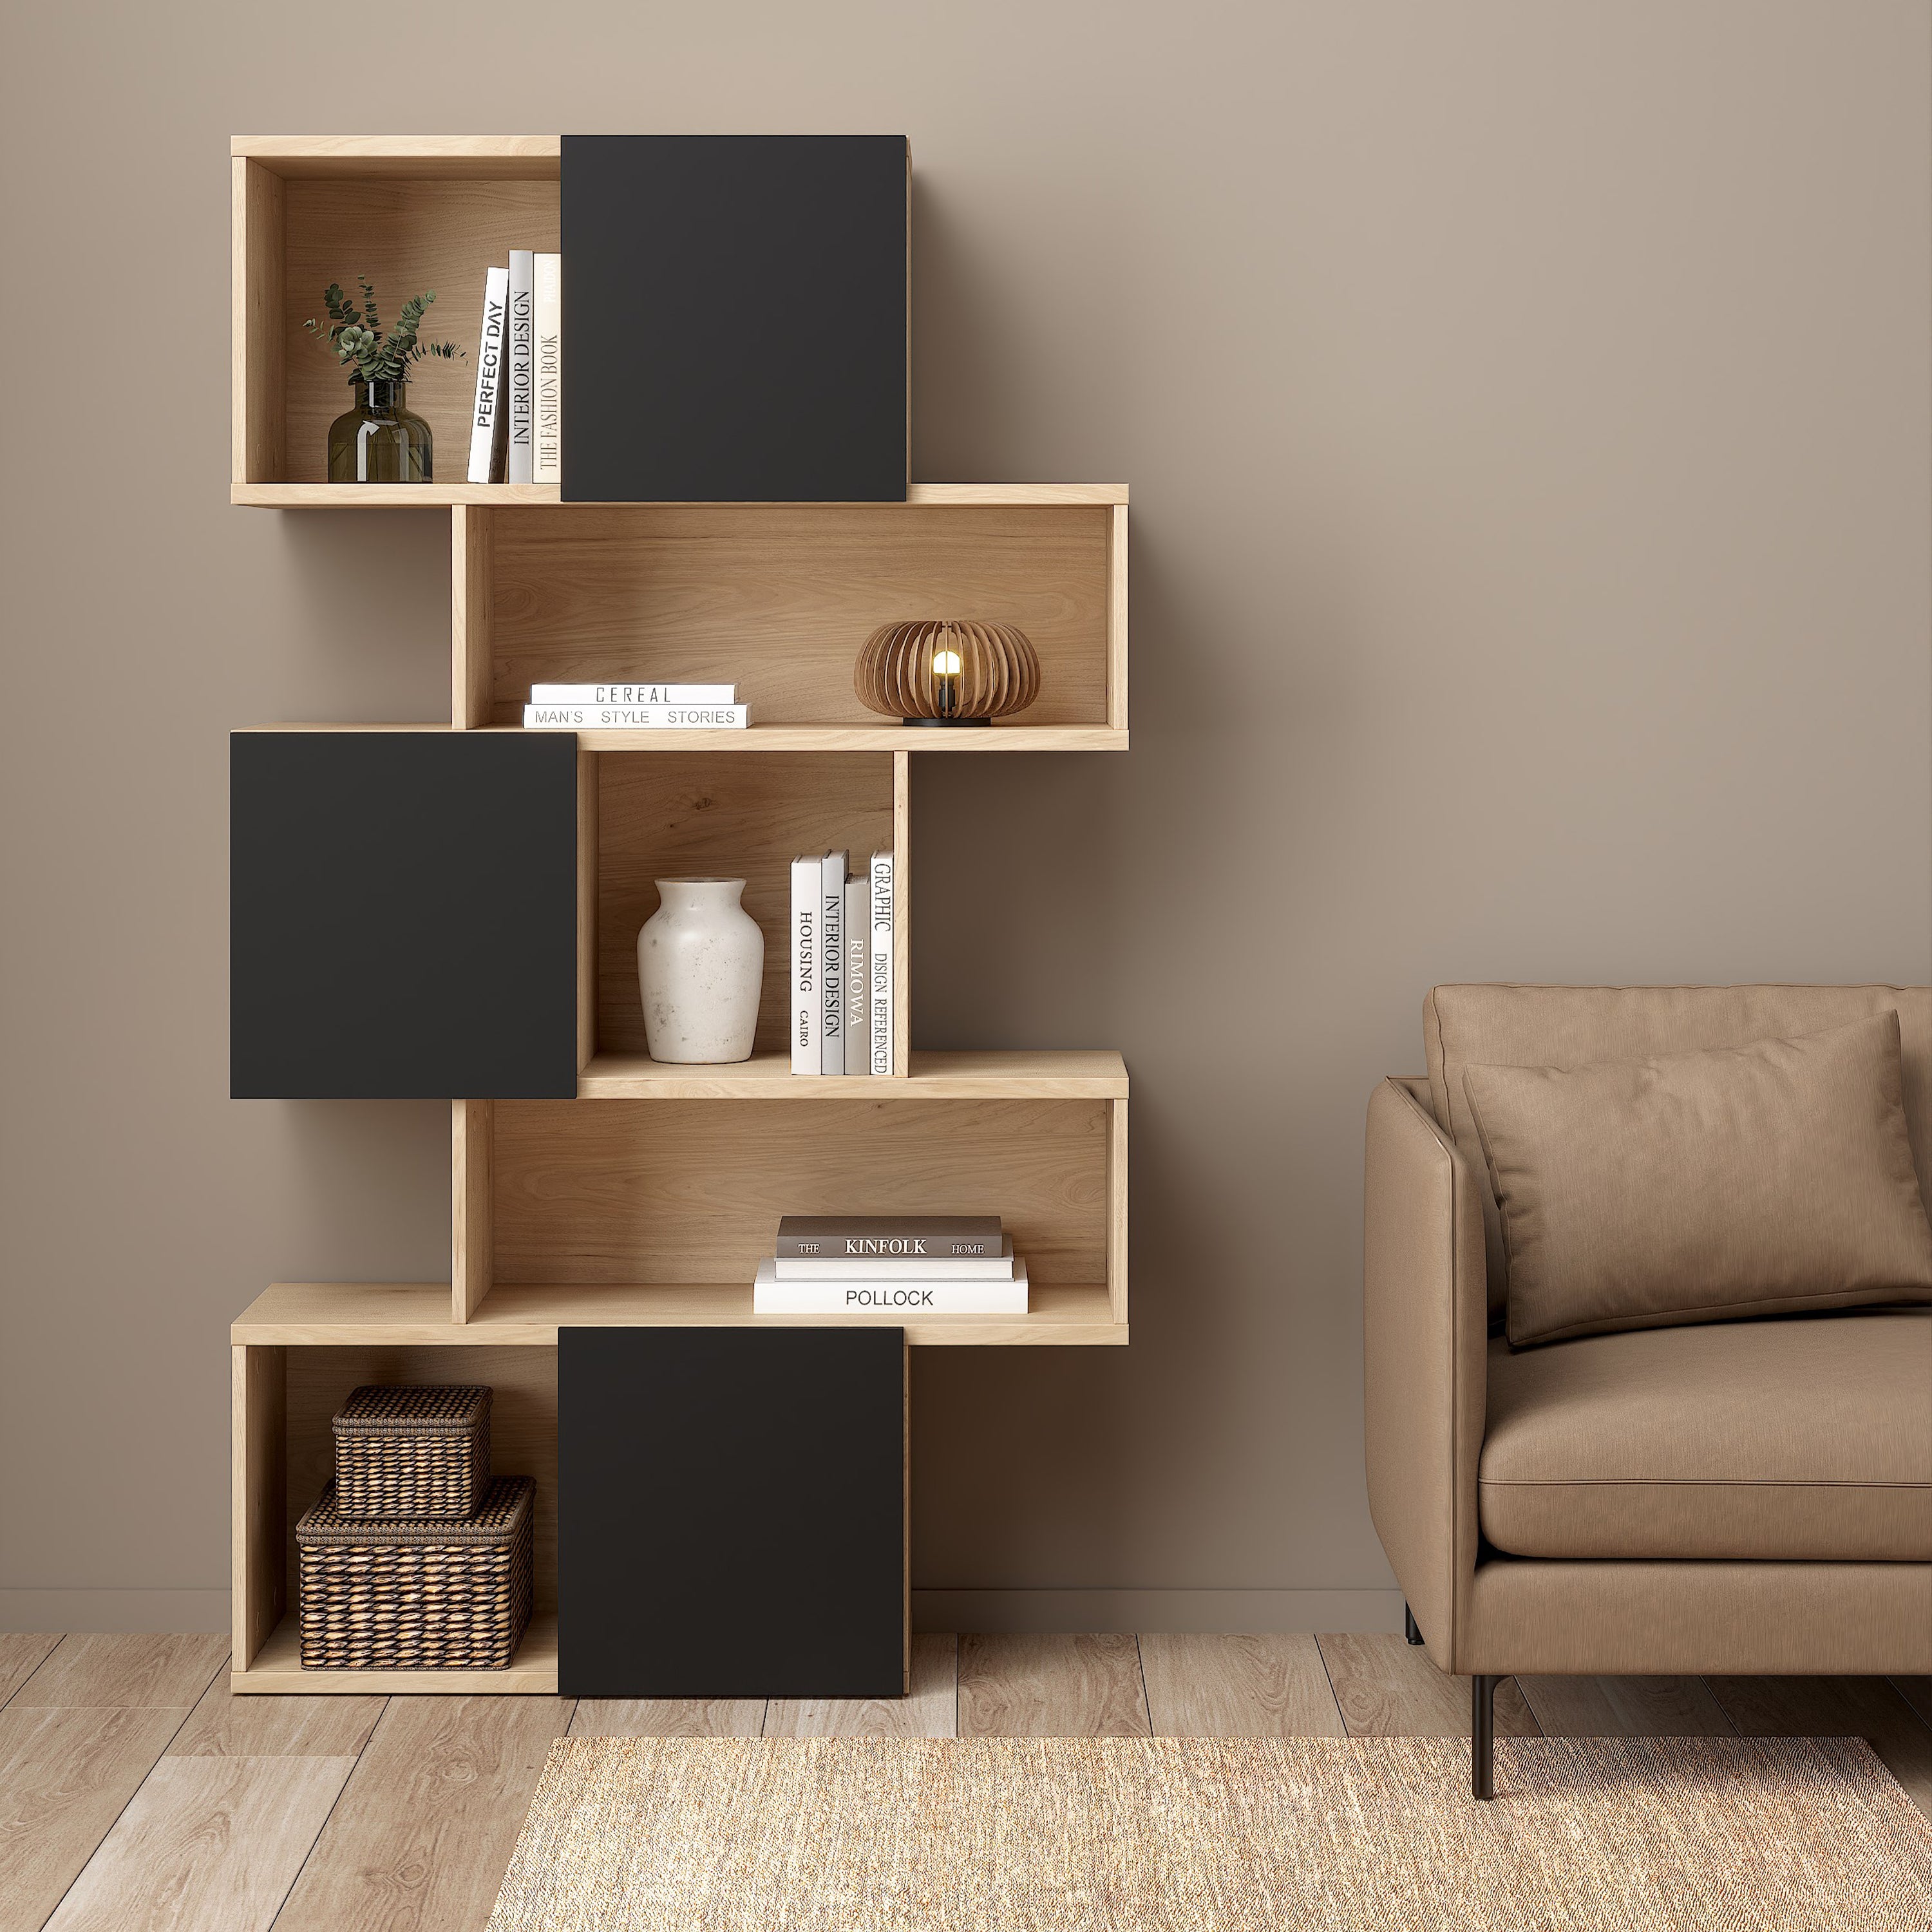 Maze Asymmetrical Bookcase with 3 Doors in Jackson Hickory and Black